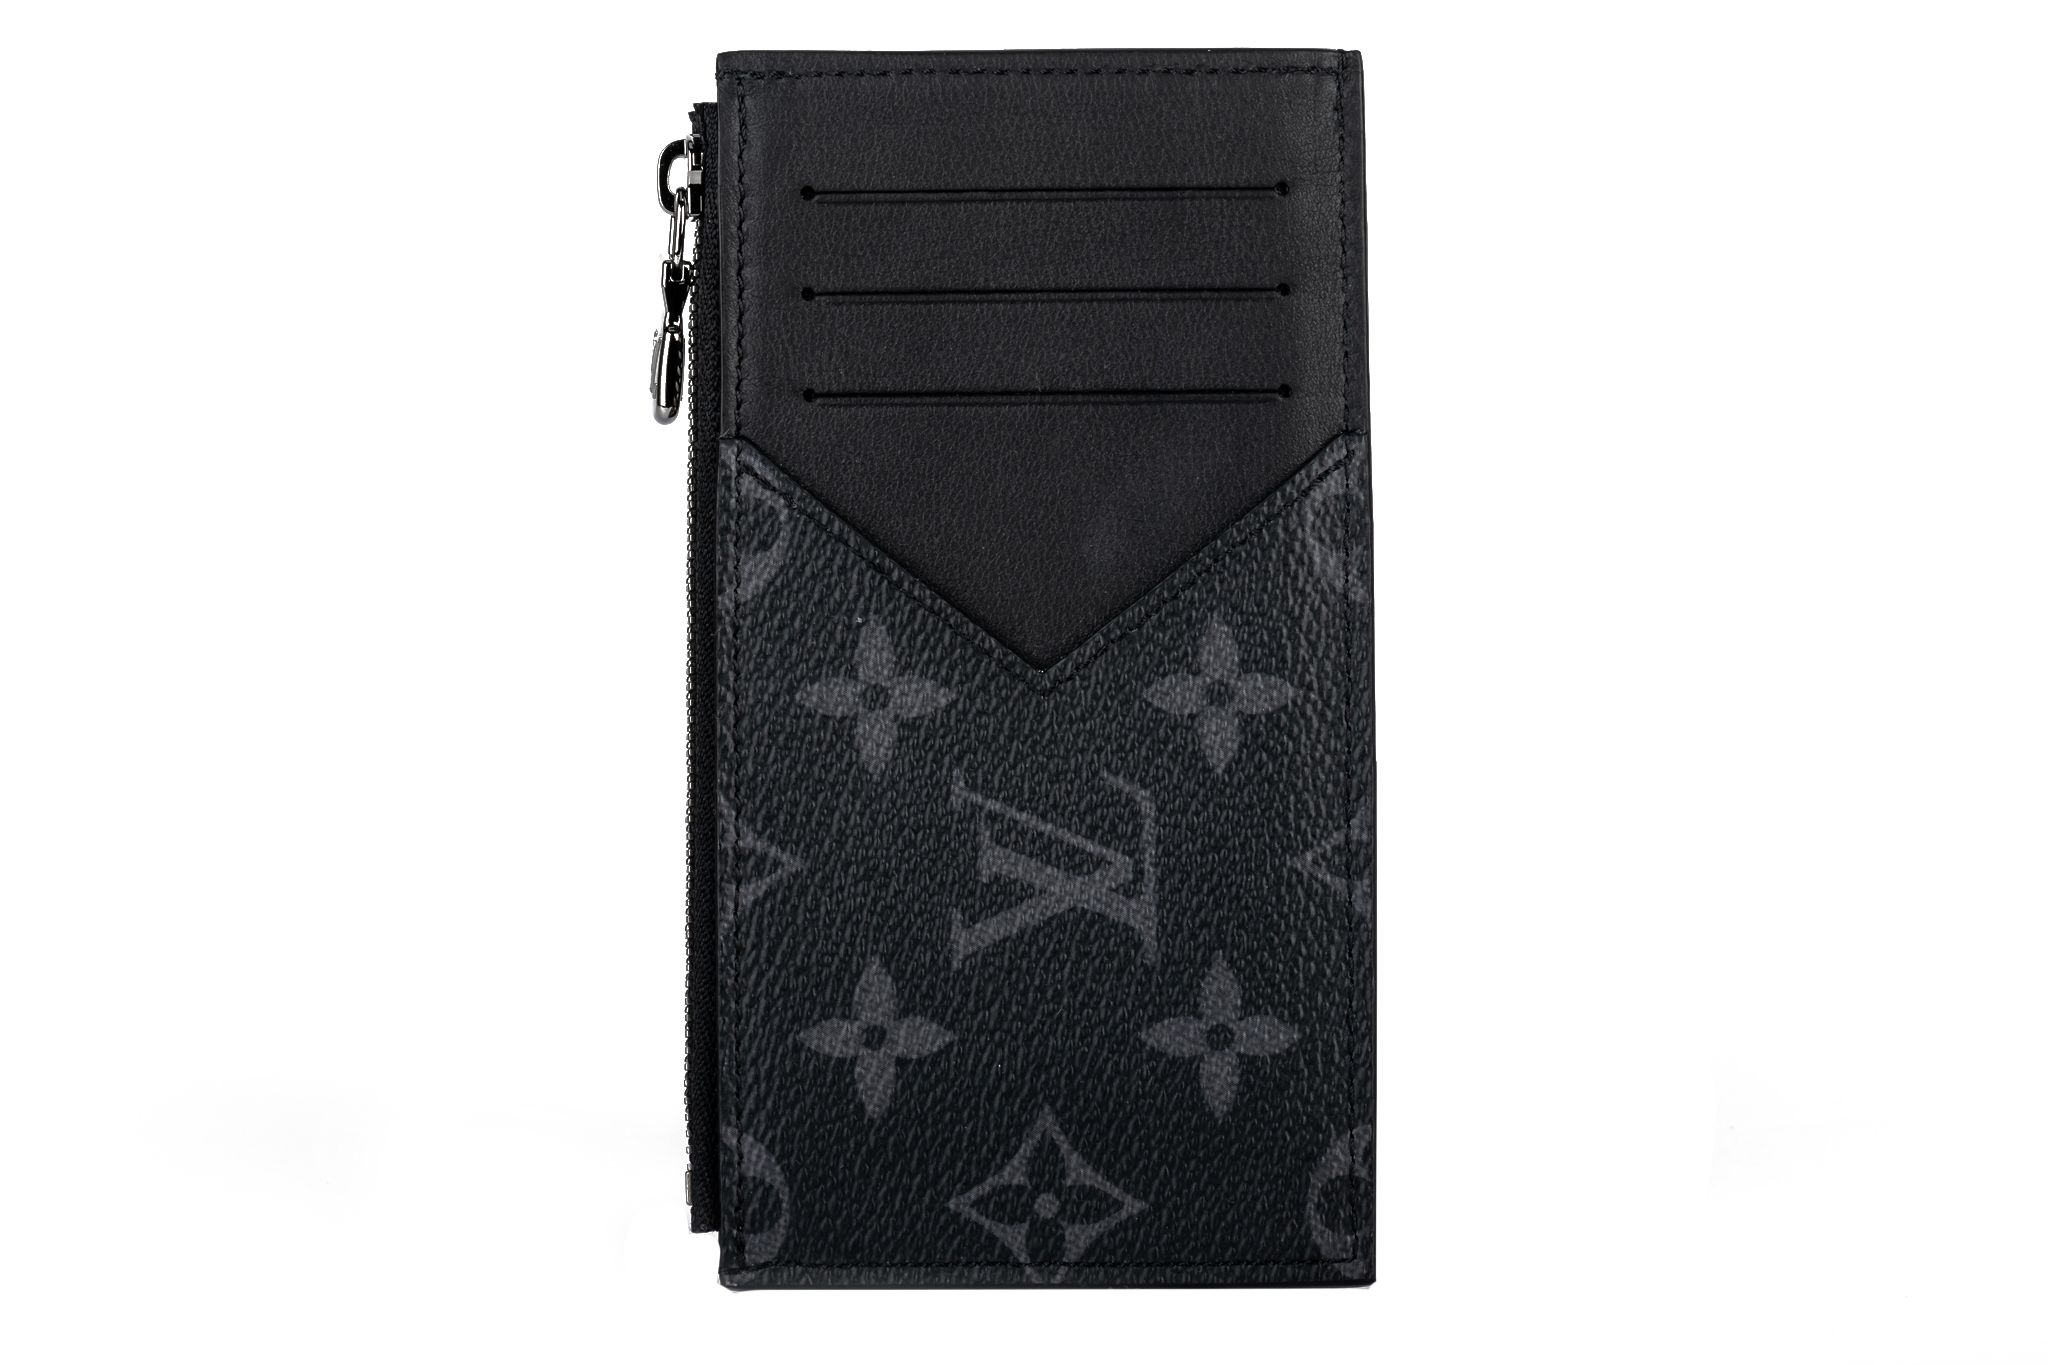 Louis Vuitton Limited Edition Damier Eclipse Canvas Comic Trunk Coin Card Holder Wallet